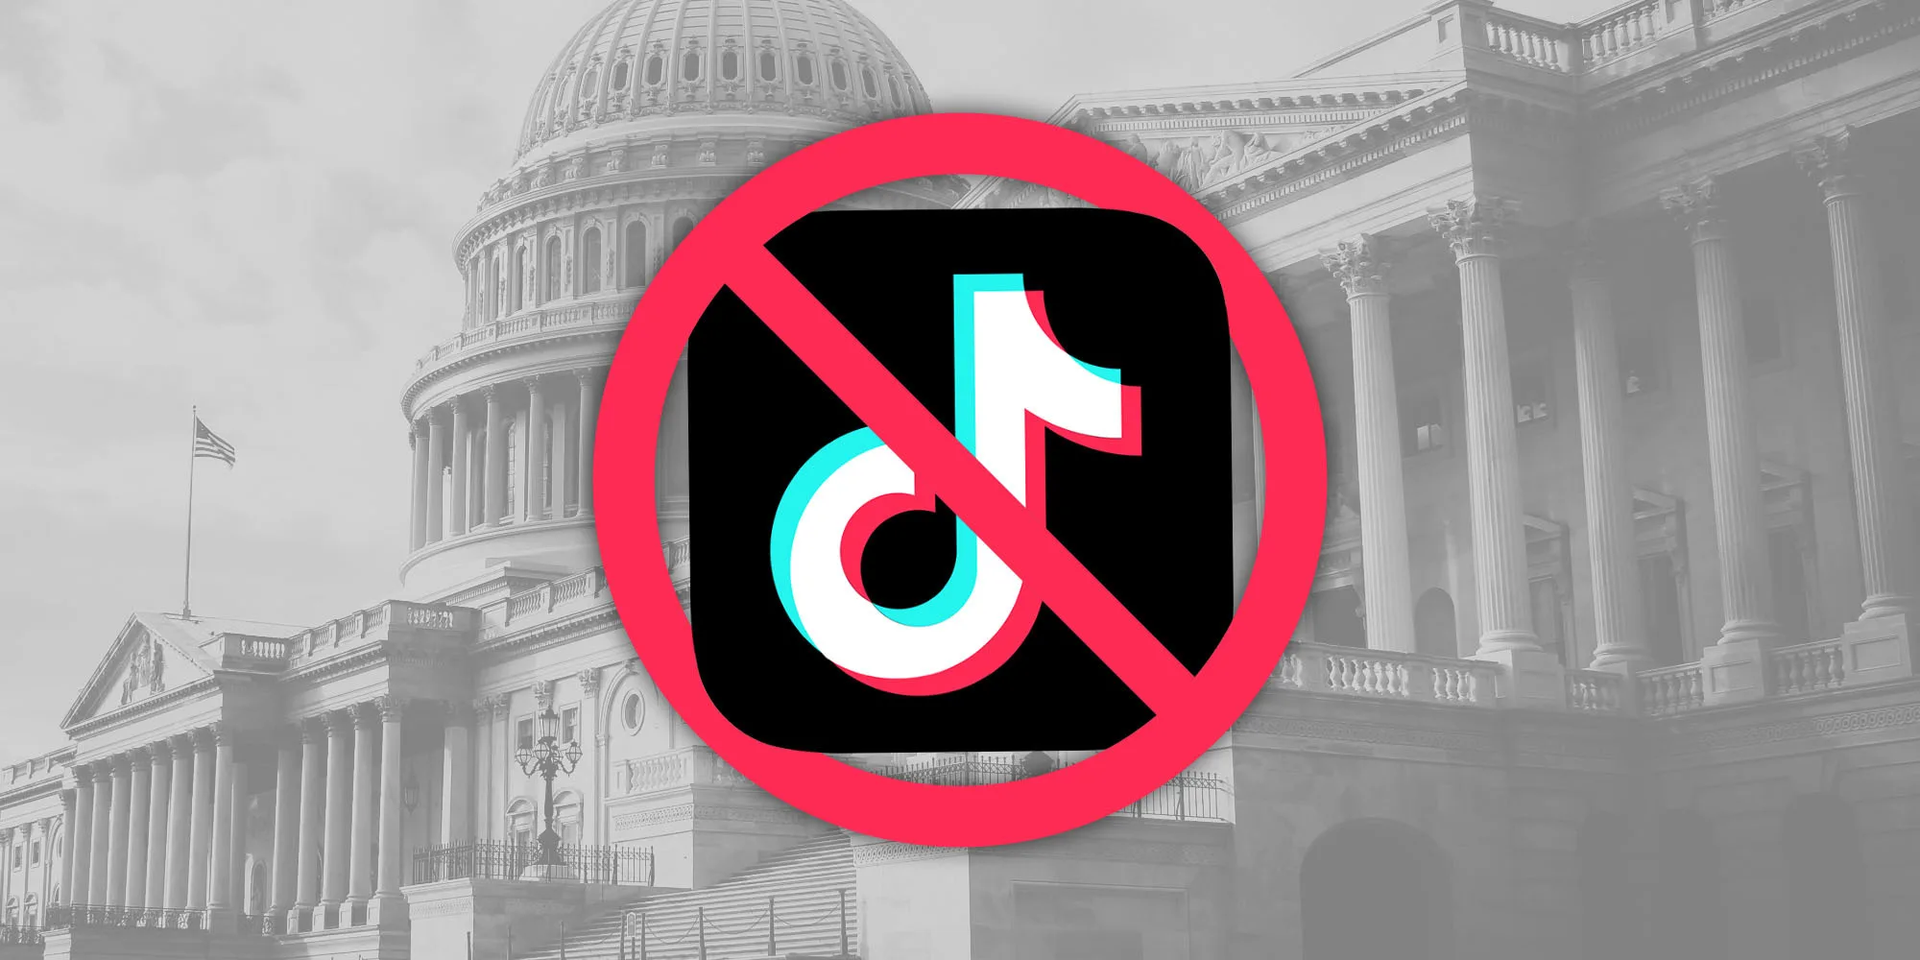 TikTok was banned from government-issued devices following a bill in last December